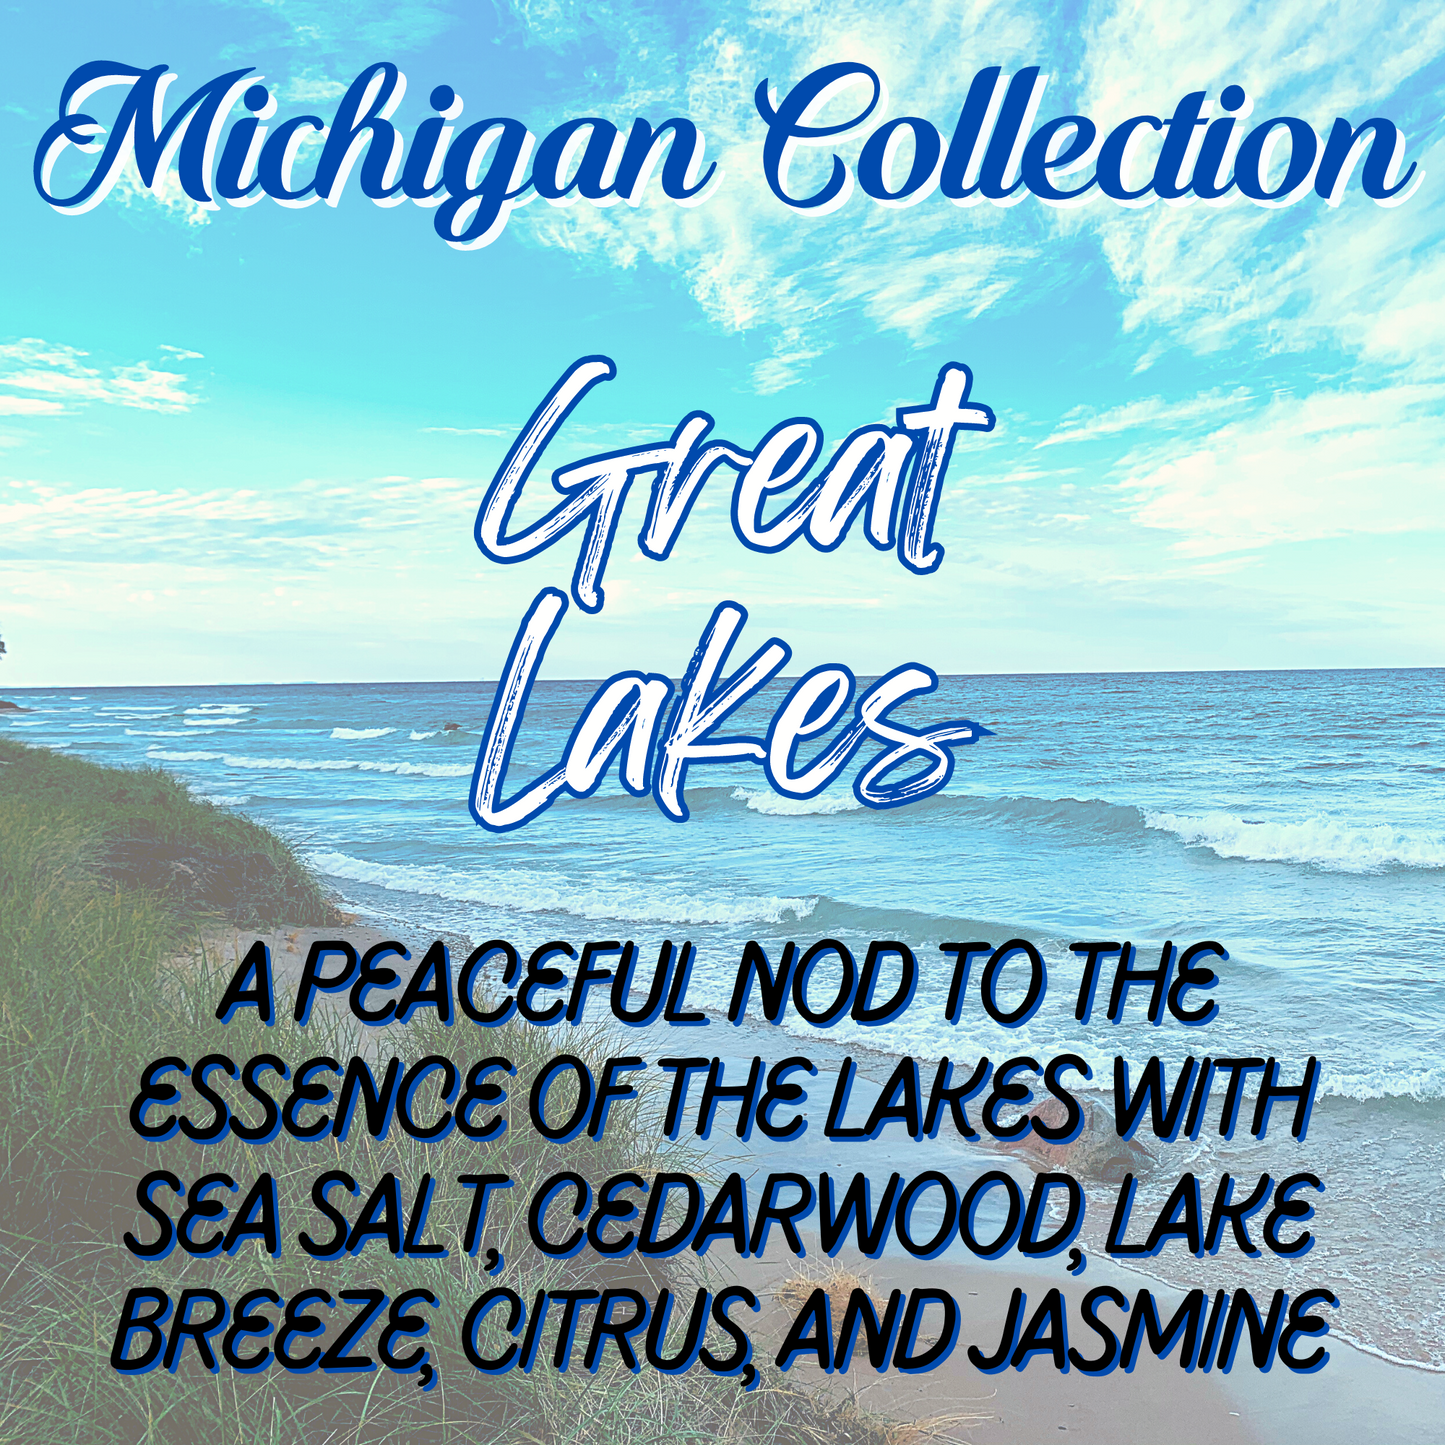 Michigan Whipped Body Butter | Great Lakes Inspired Scent | Choice of Size